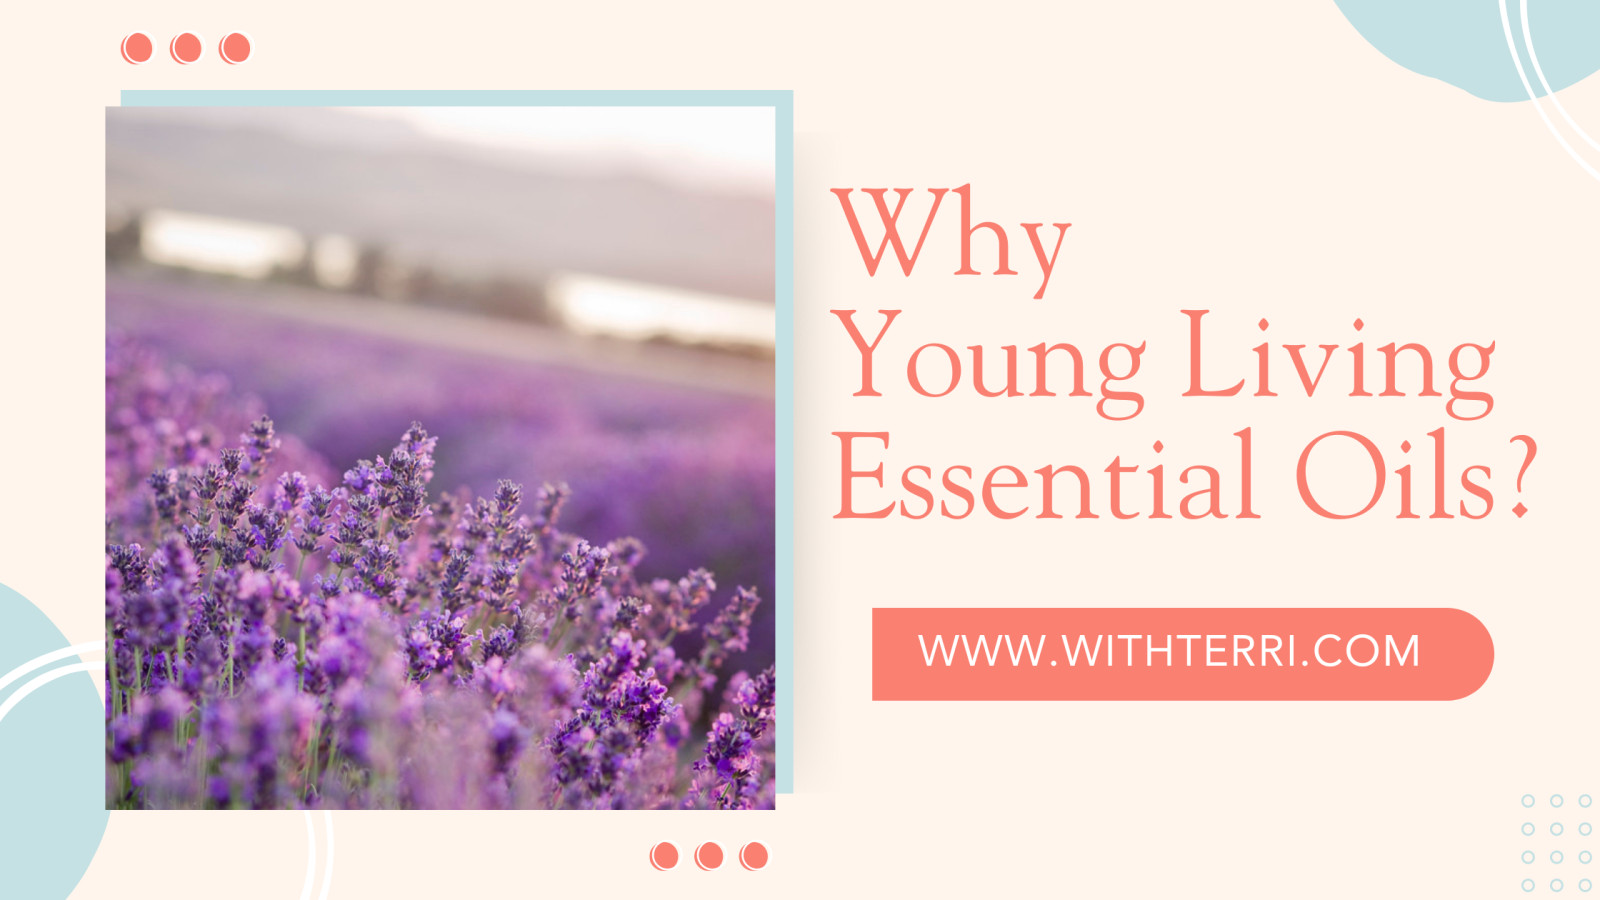 Why Young Living Essential Oils?